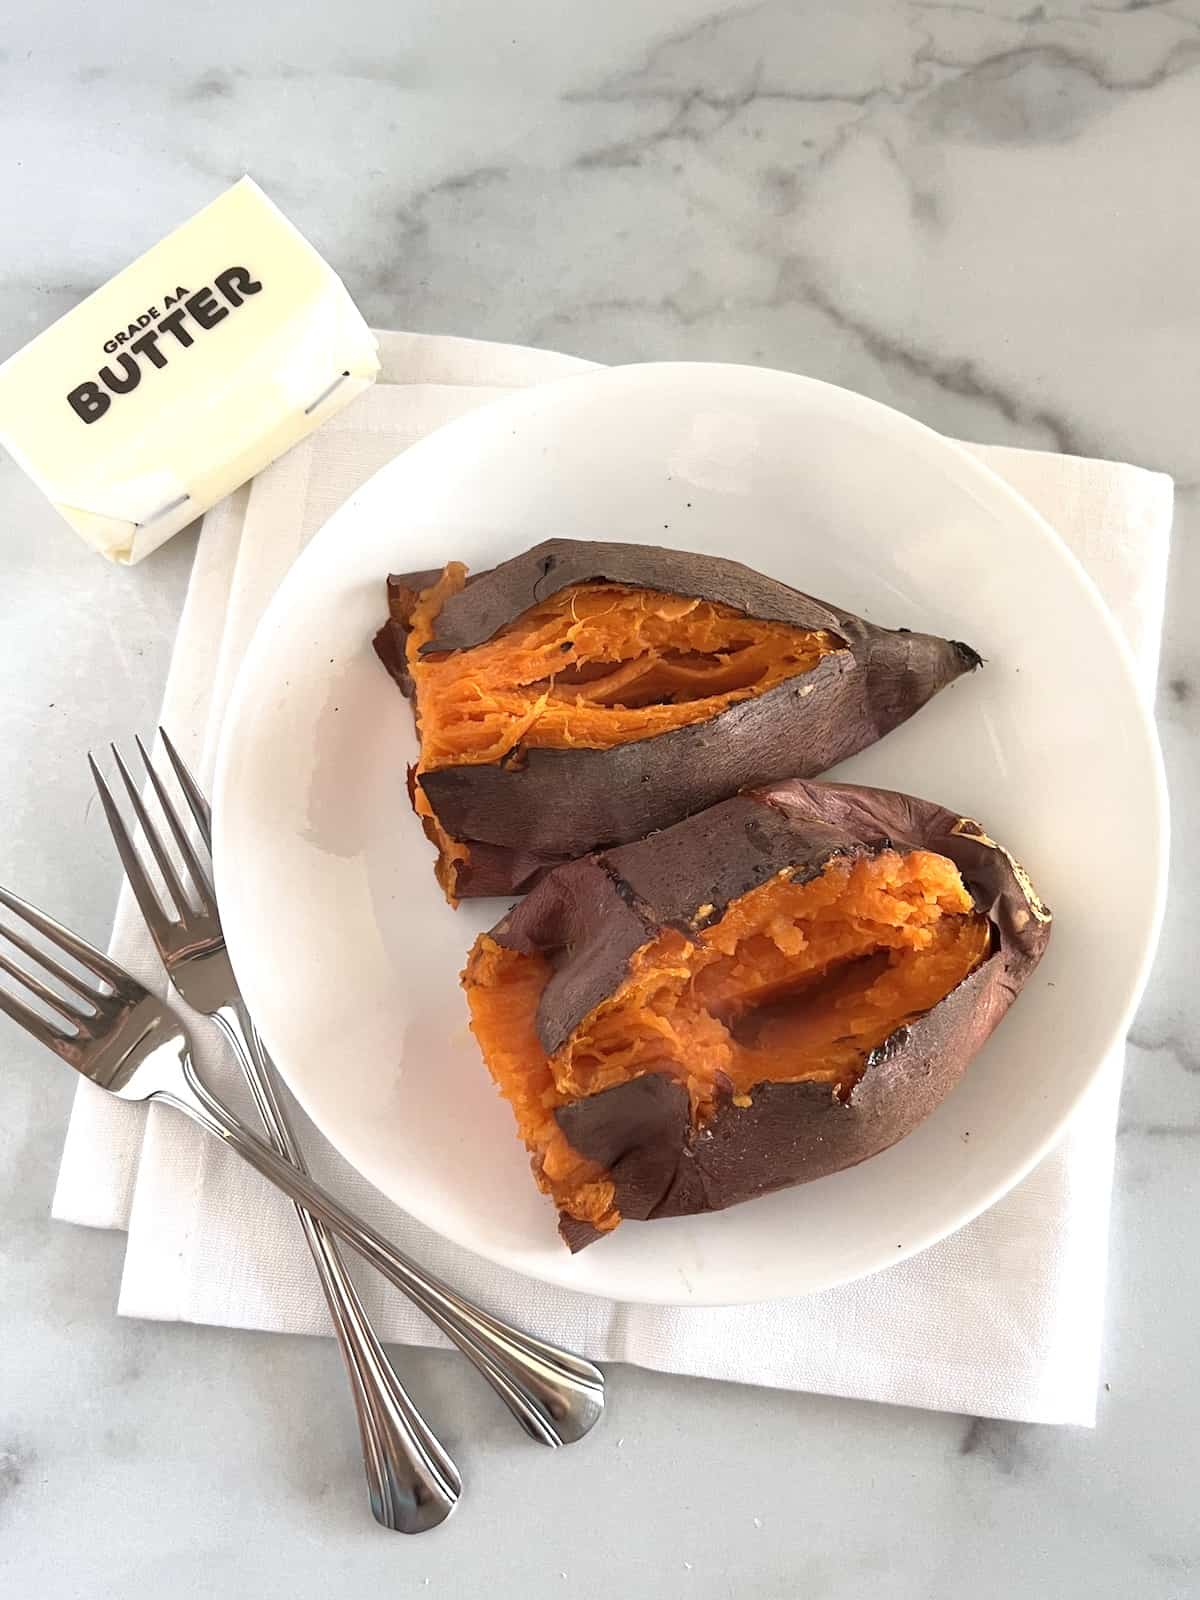 Air Fryer Baked Sweet Potatoes Split open on a plate with forks white linen napkin and stick of butterAir Fryer Baked Sweet Potatoes Split open on a plate with forks white linen napkin and stick of butter